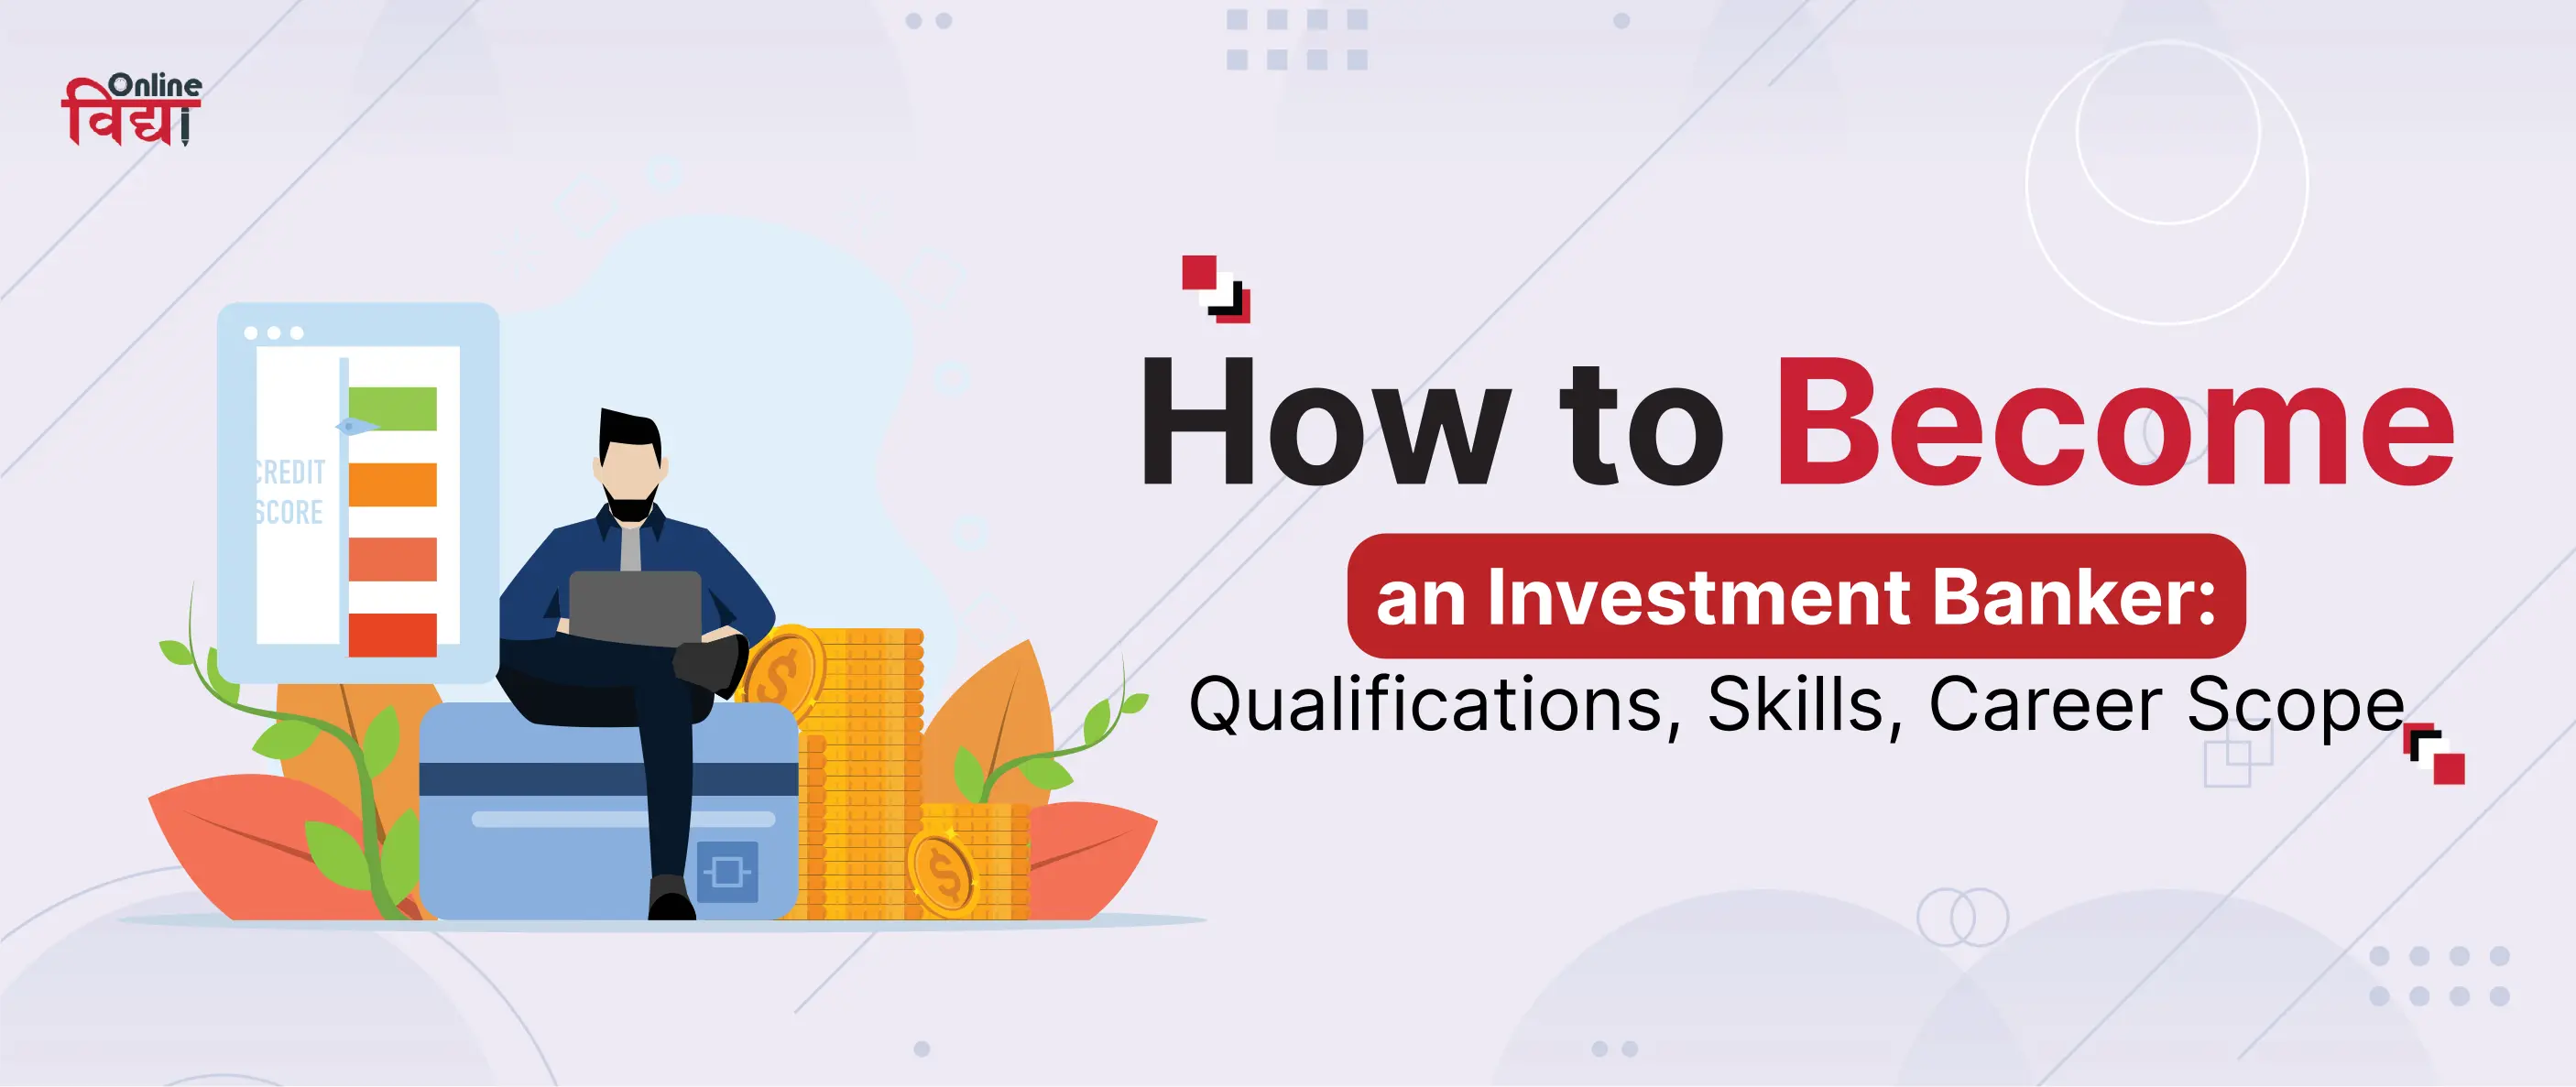 How to Become an Investment Banker: Qualifications, Skills, Career Scope